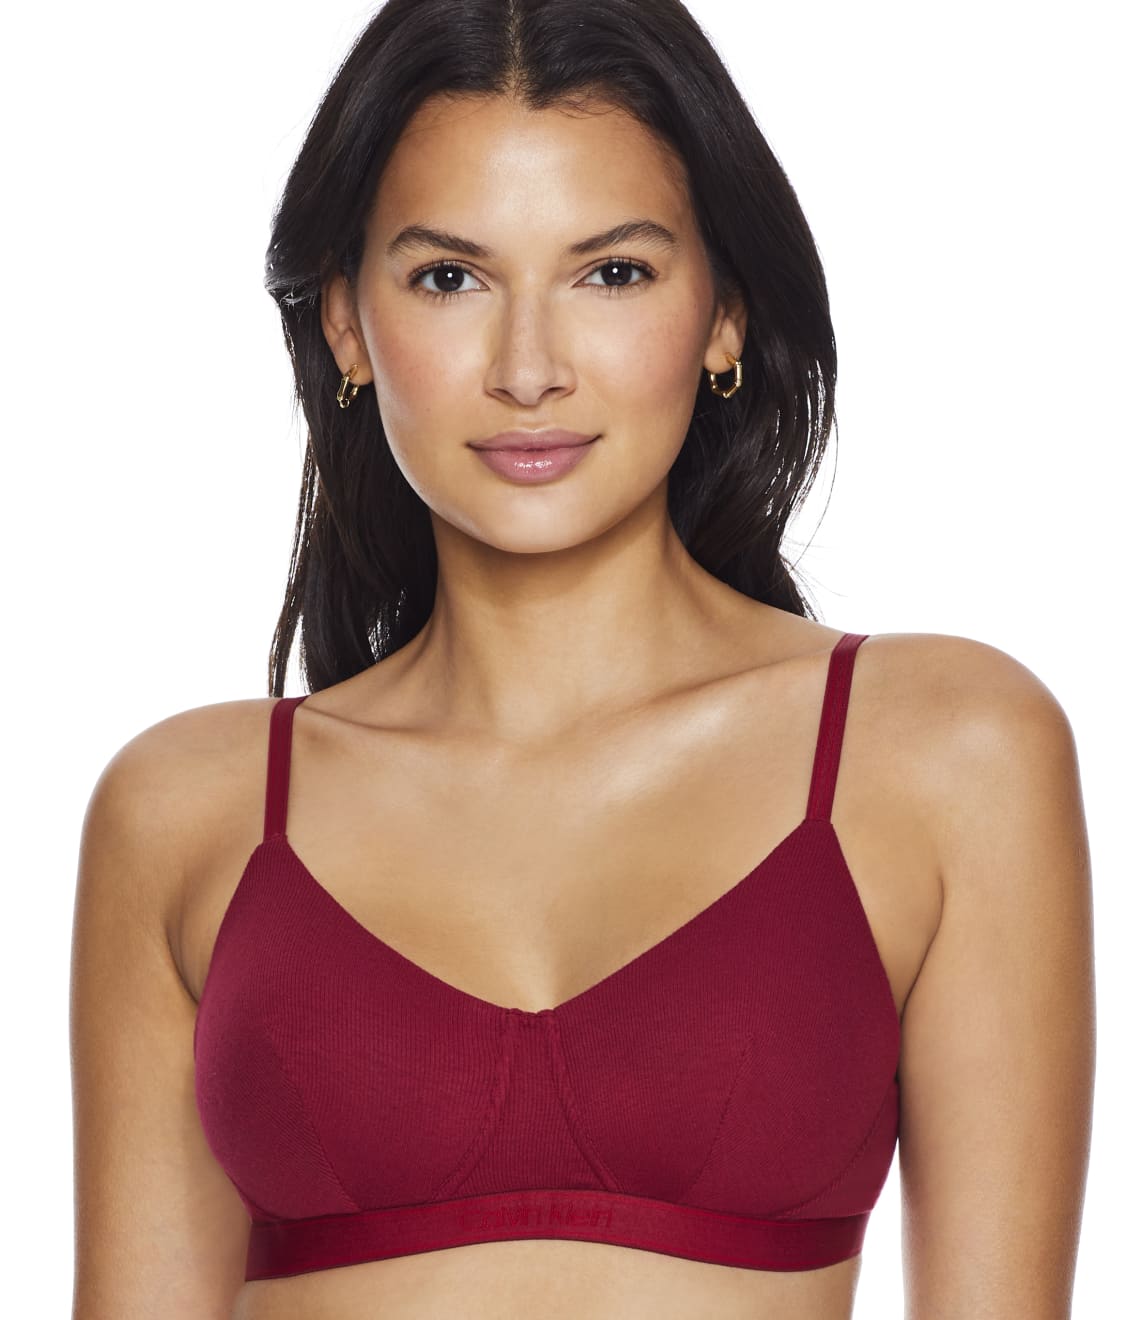 Calvin Klein Women Pure Ribbed Lightly Lined Bralette QF6439